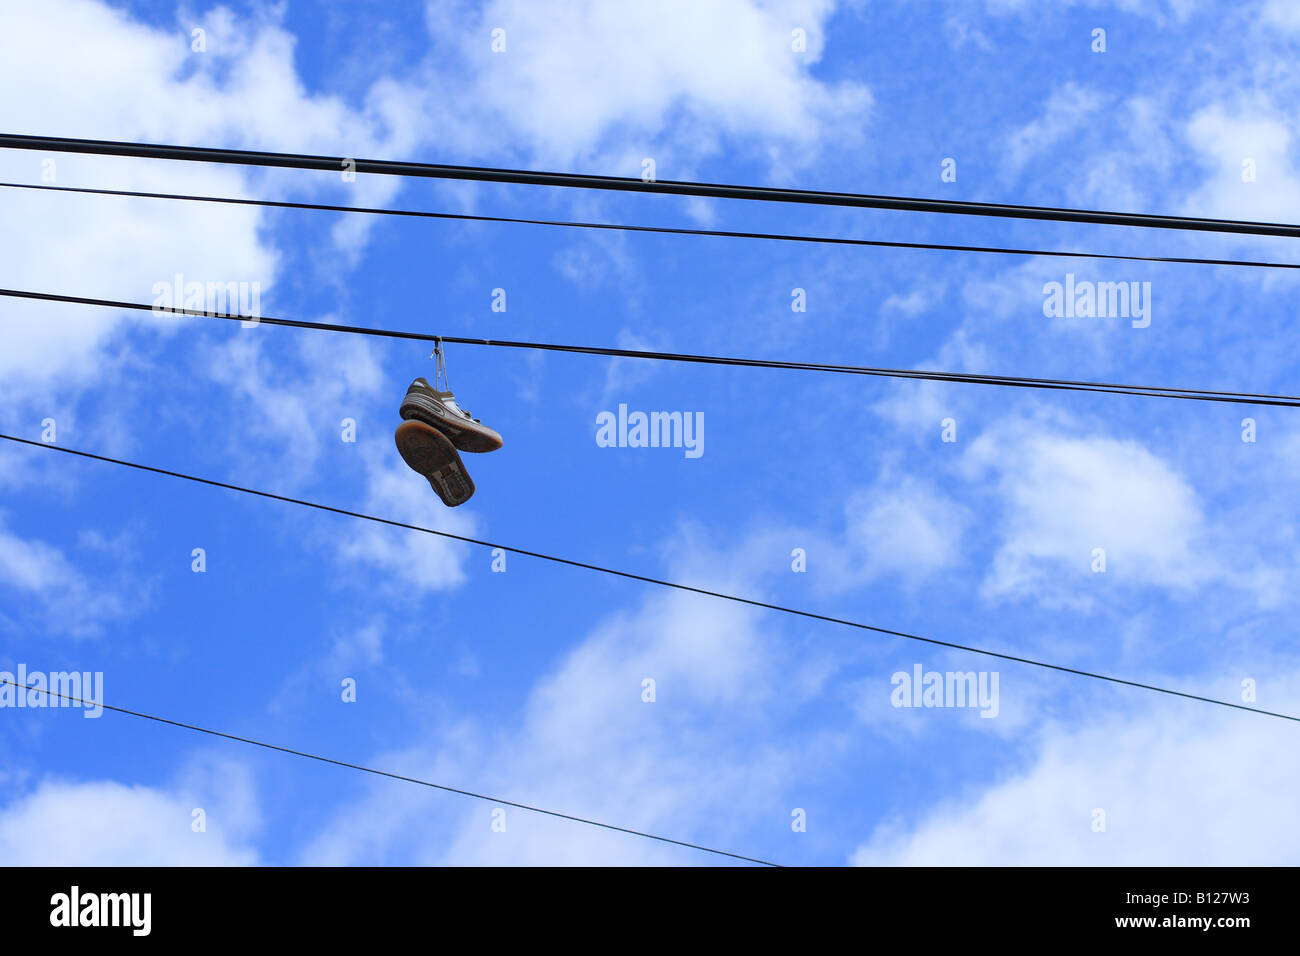 Pair of sneakers hanging from a powerline Stock Photo